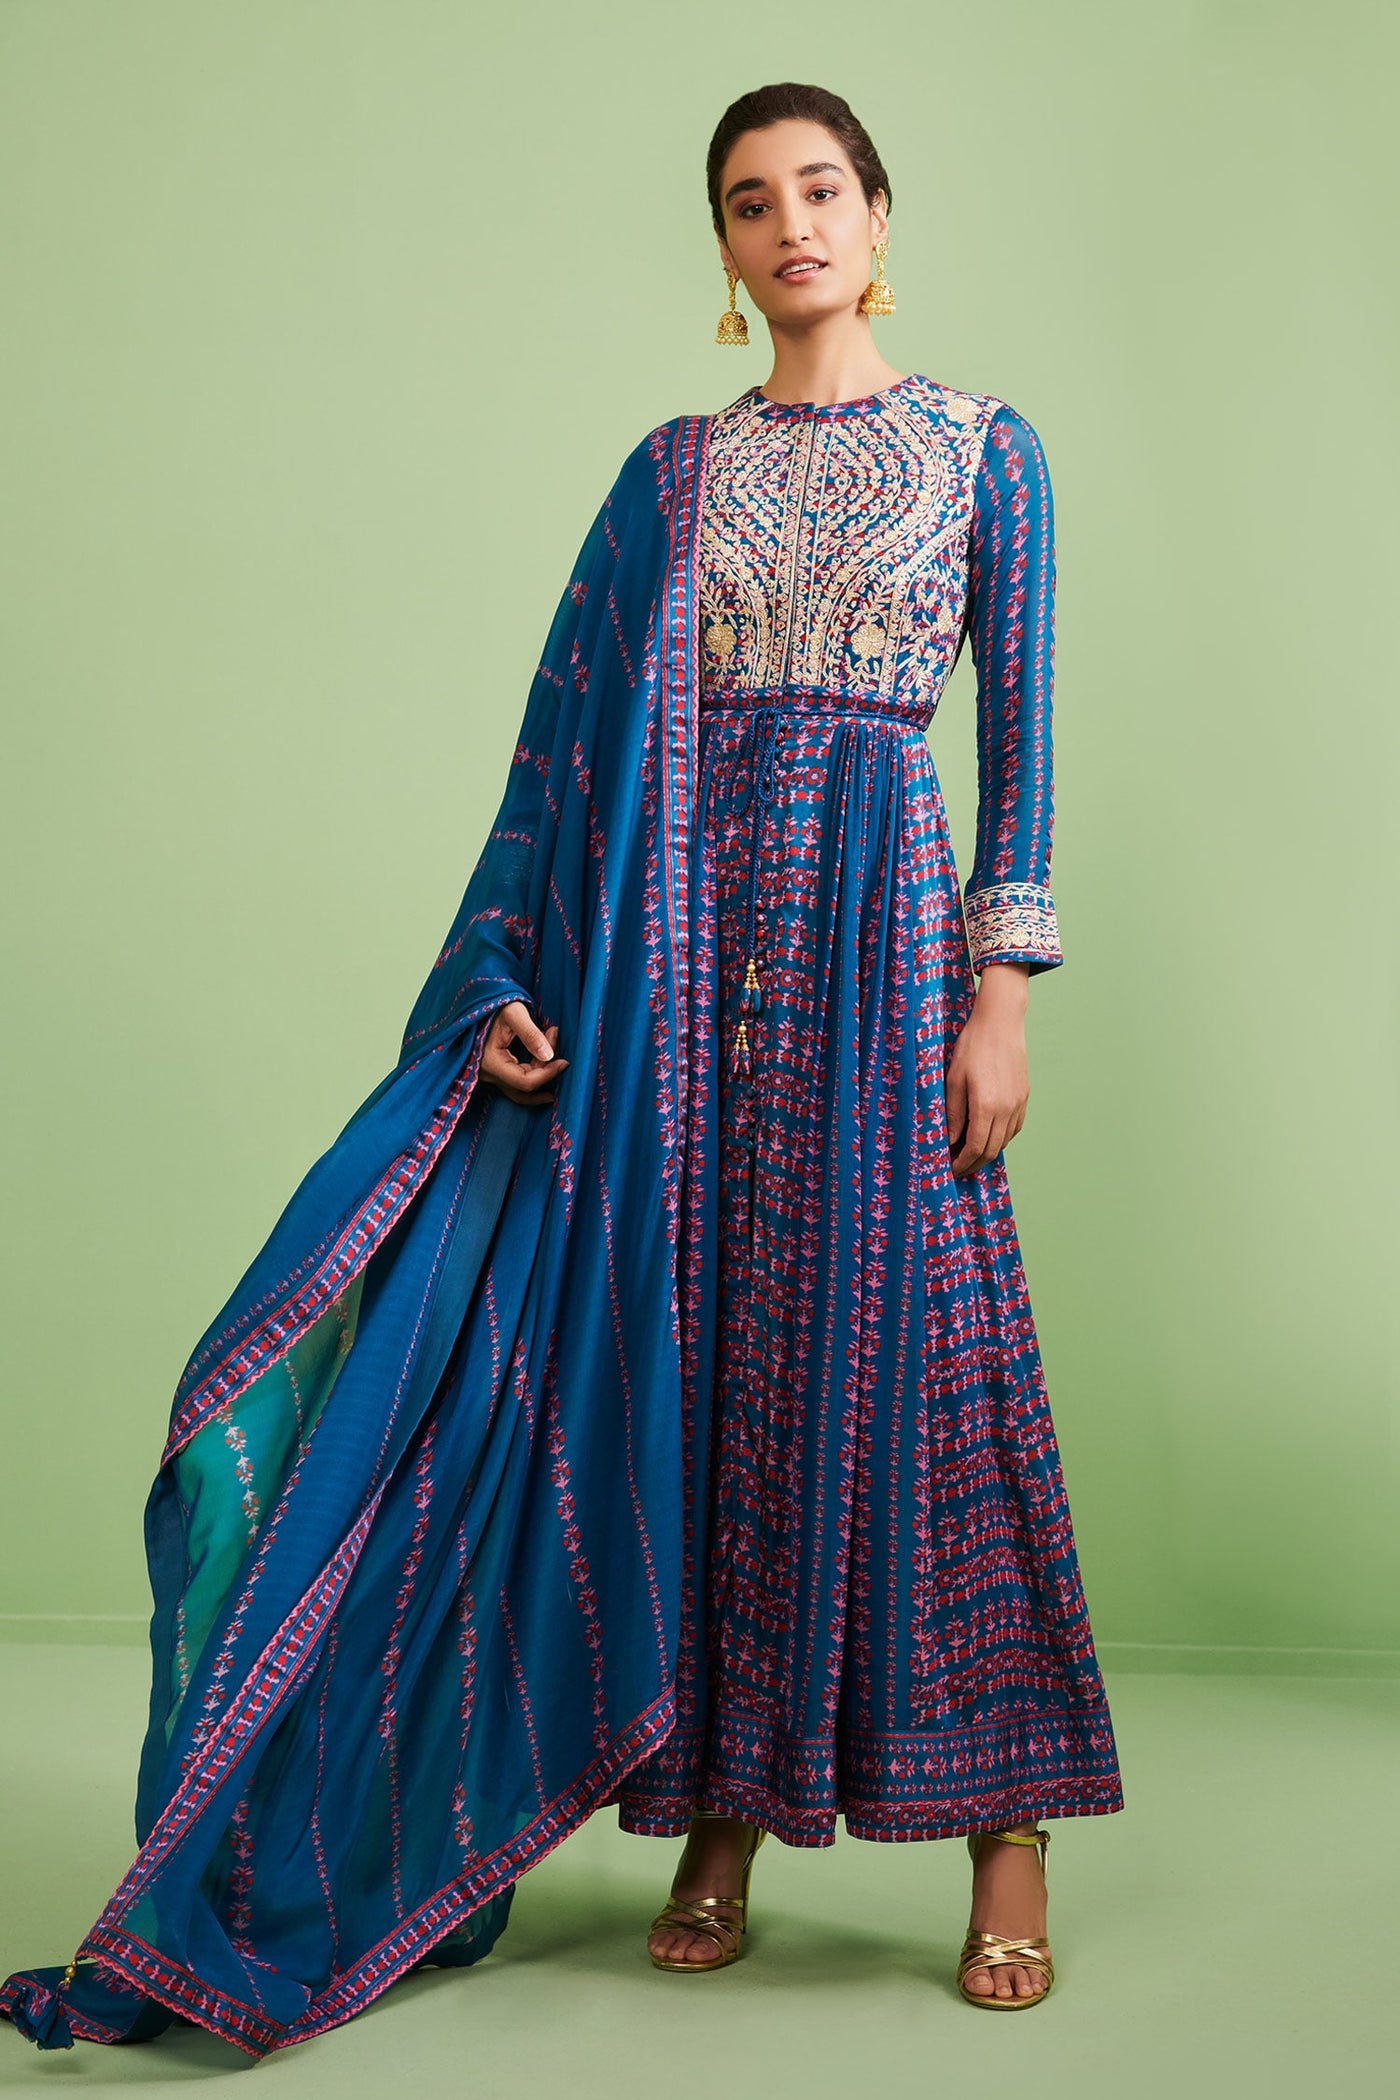 Blue Gota Embroidered Anarkali - Indian Clothing in Denver, CO, Aurora, CO, Boulder, CO, Fort Collins, CO, Colorado Springs, CO, Parker, CO, Highlands Ranch, CO, Cherry Creek, CO, Centennial, CO, and Longmont, CO. Nationwide shipping USA - India Fashion X